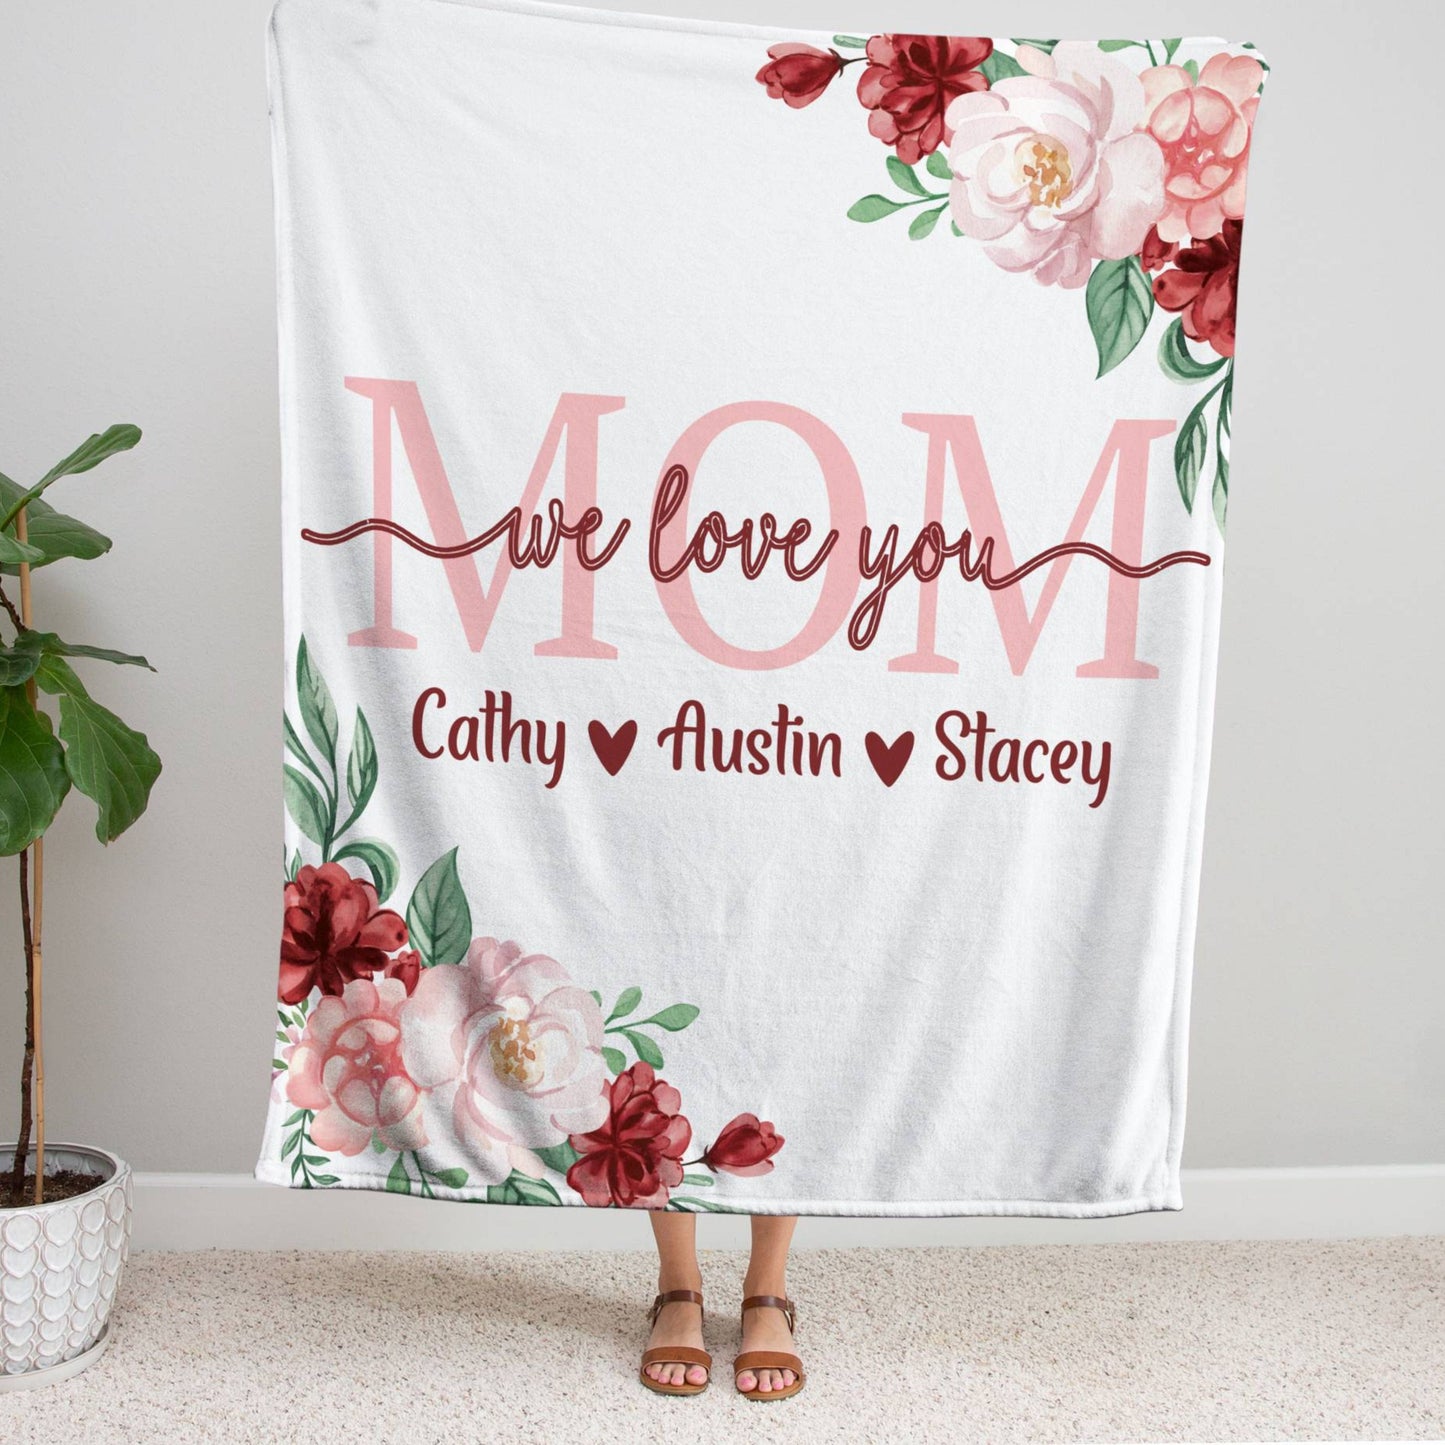 We love you Mom- Personalized Blanket